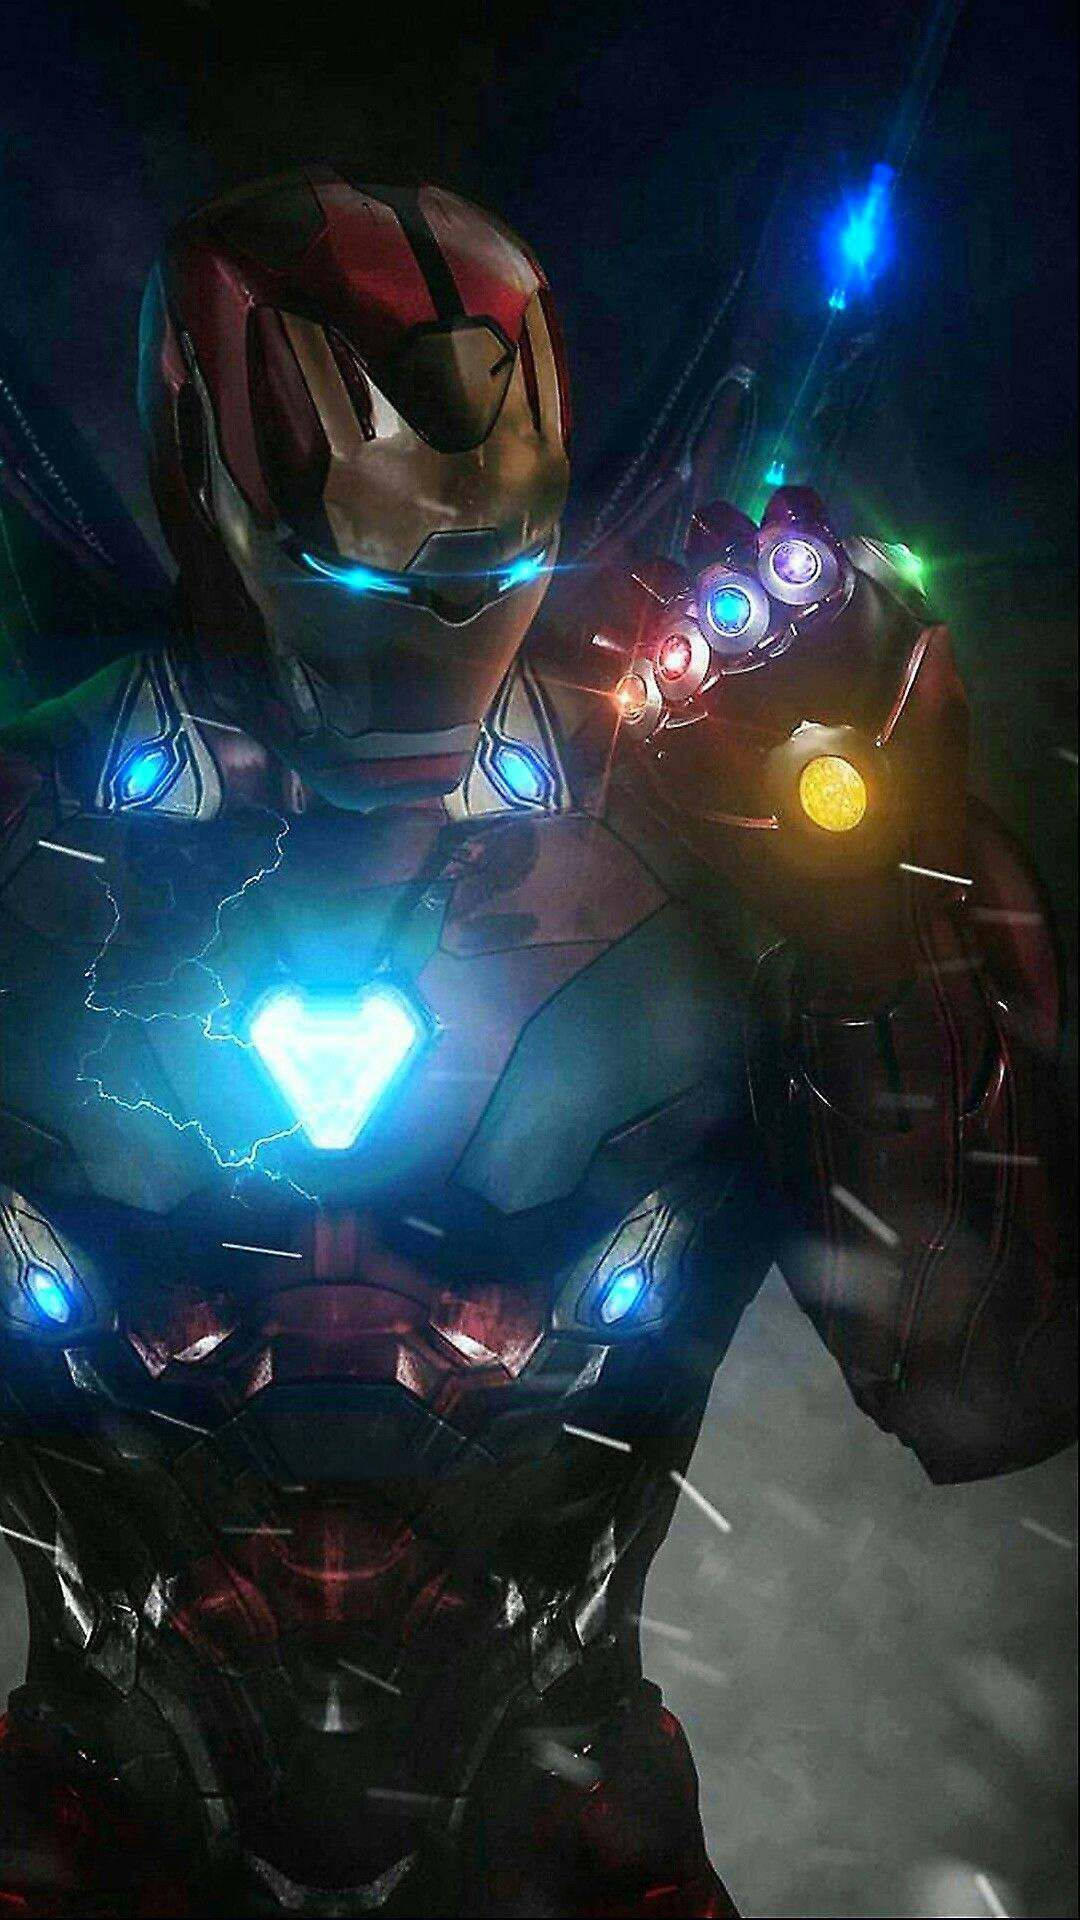 Infinitystones Ironman Hd Translated To Spanish Would Be 